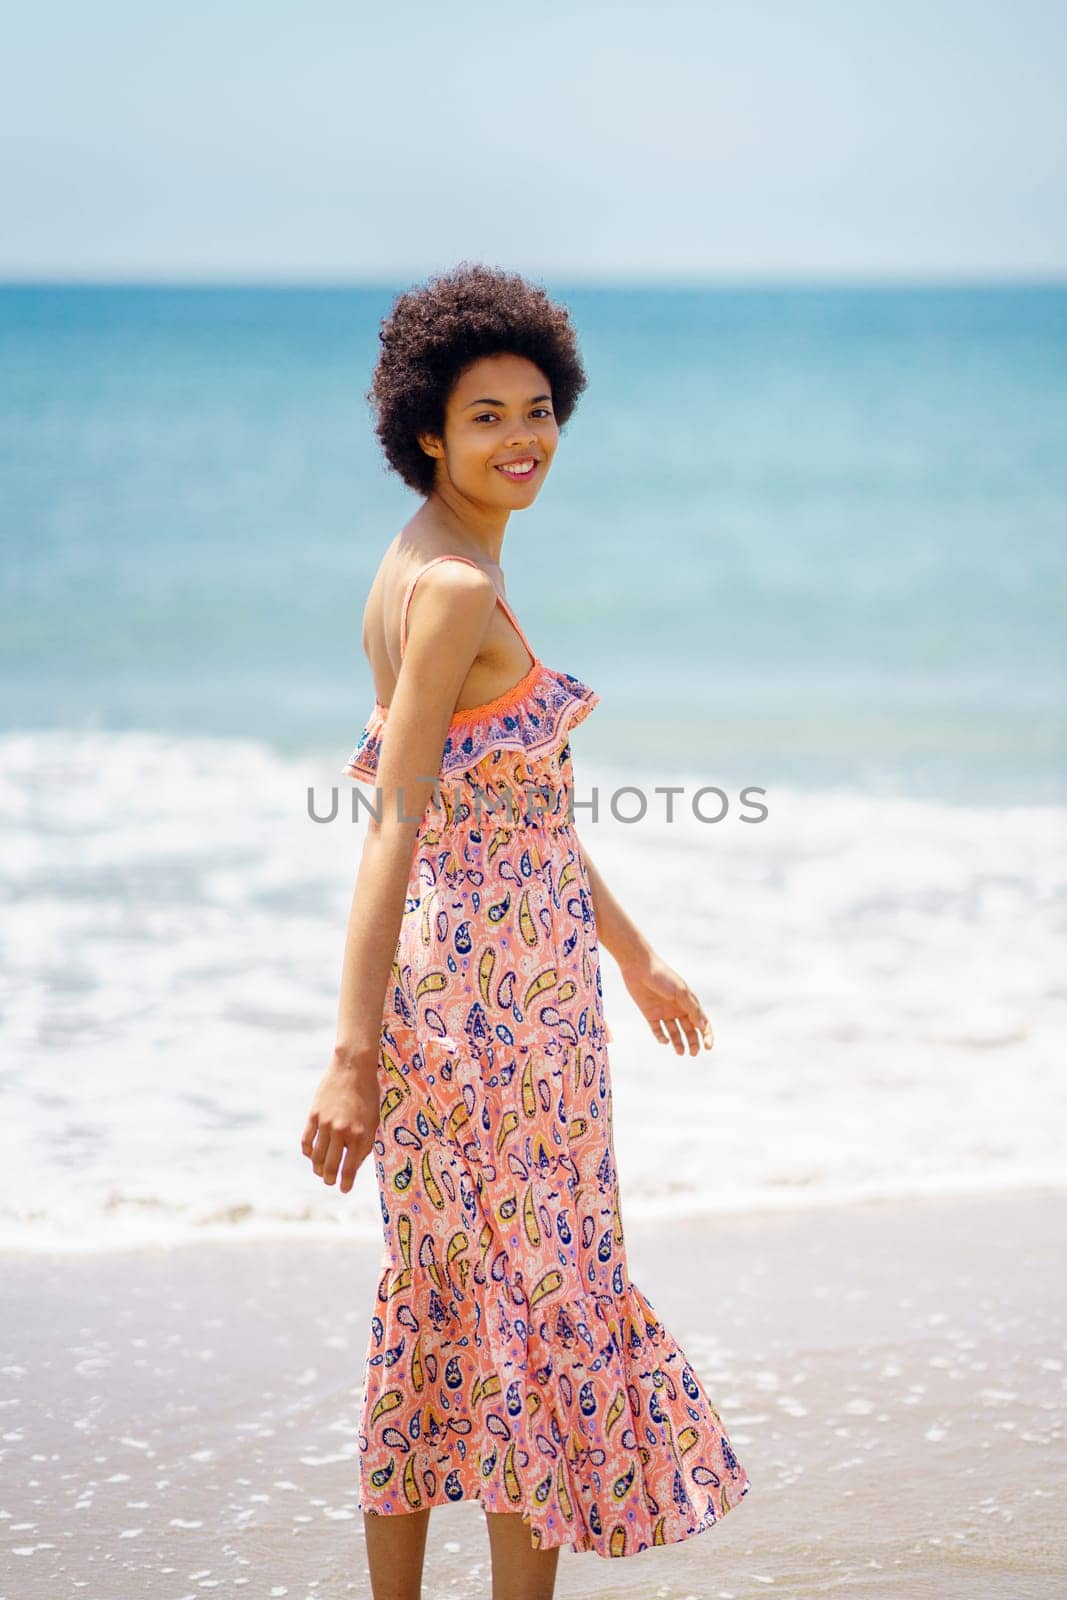 Side view of carefree woman in stylish dress standing on sandy beach washed by rippling sea water and looking at camera